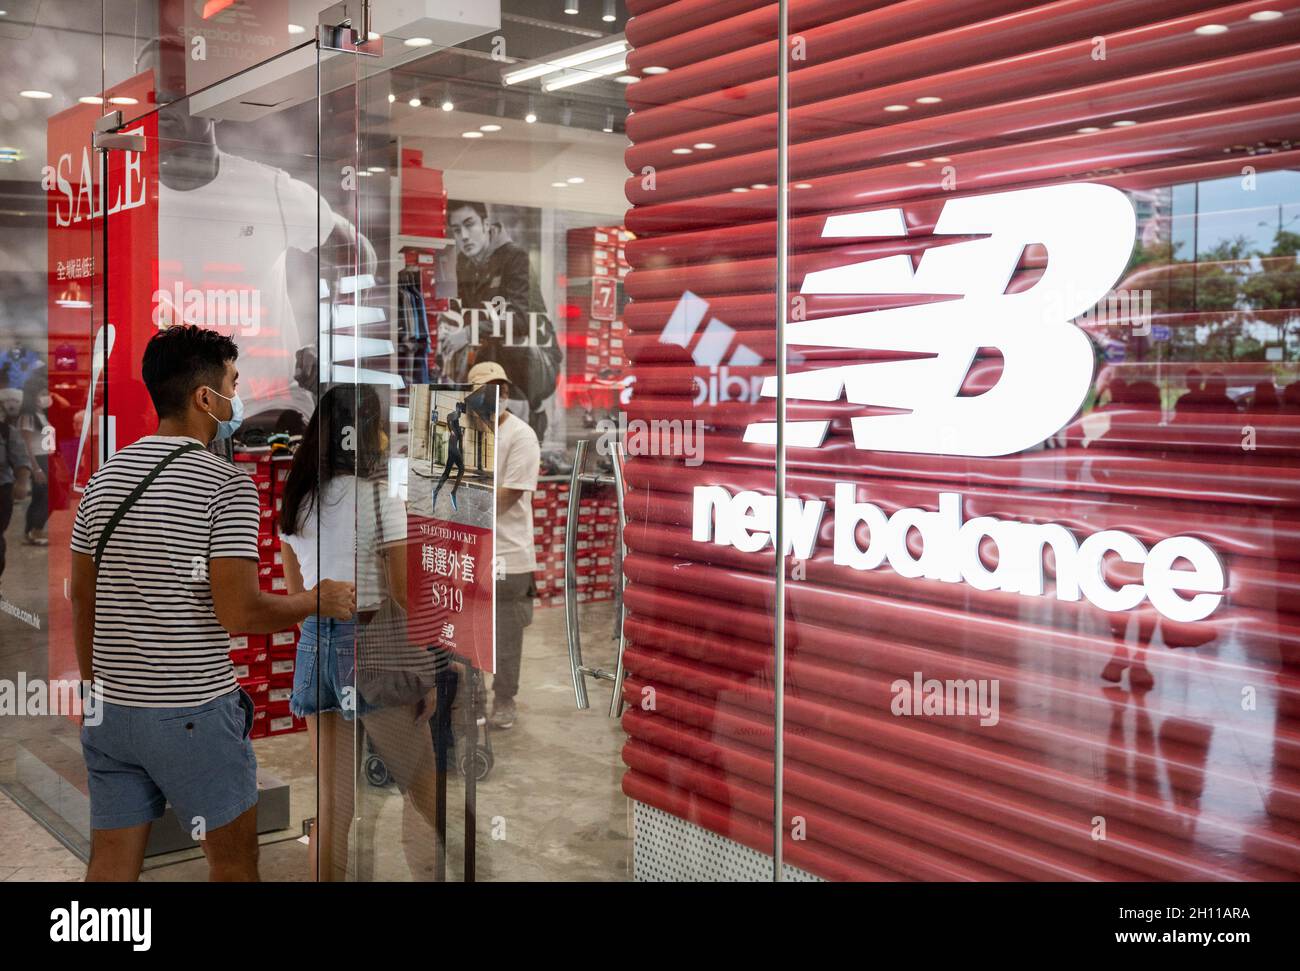 American footwear brand New Balance store and logo seen in Hong Kong Stock  Photo - Alamy